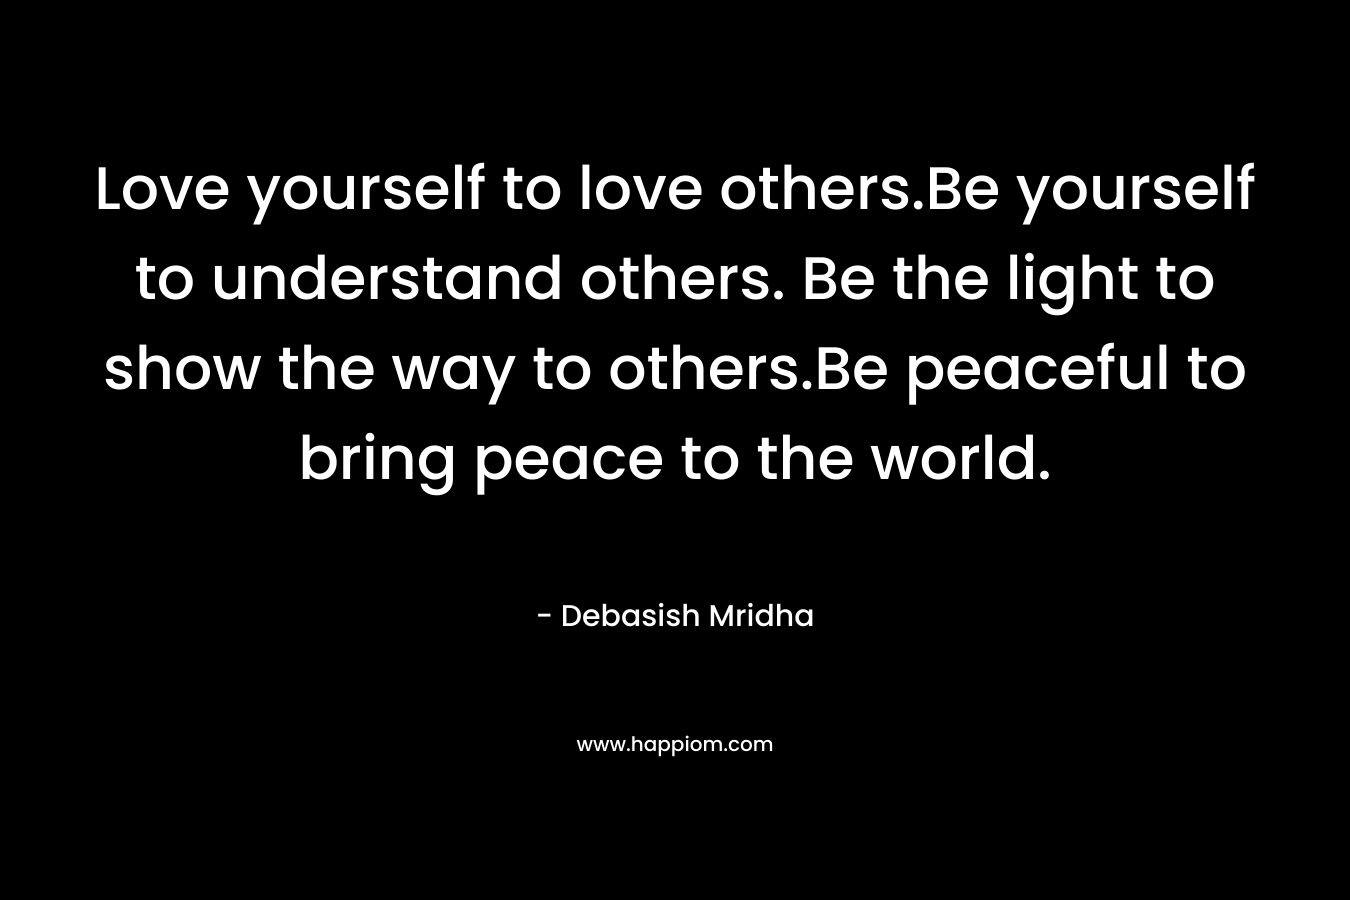 Love yourself to love others.Be yourself to understand others. Be the light to show the way to others.Be peaceful to bring peace to the world.